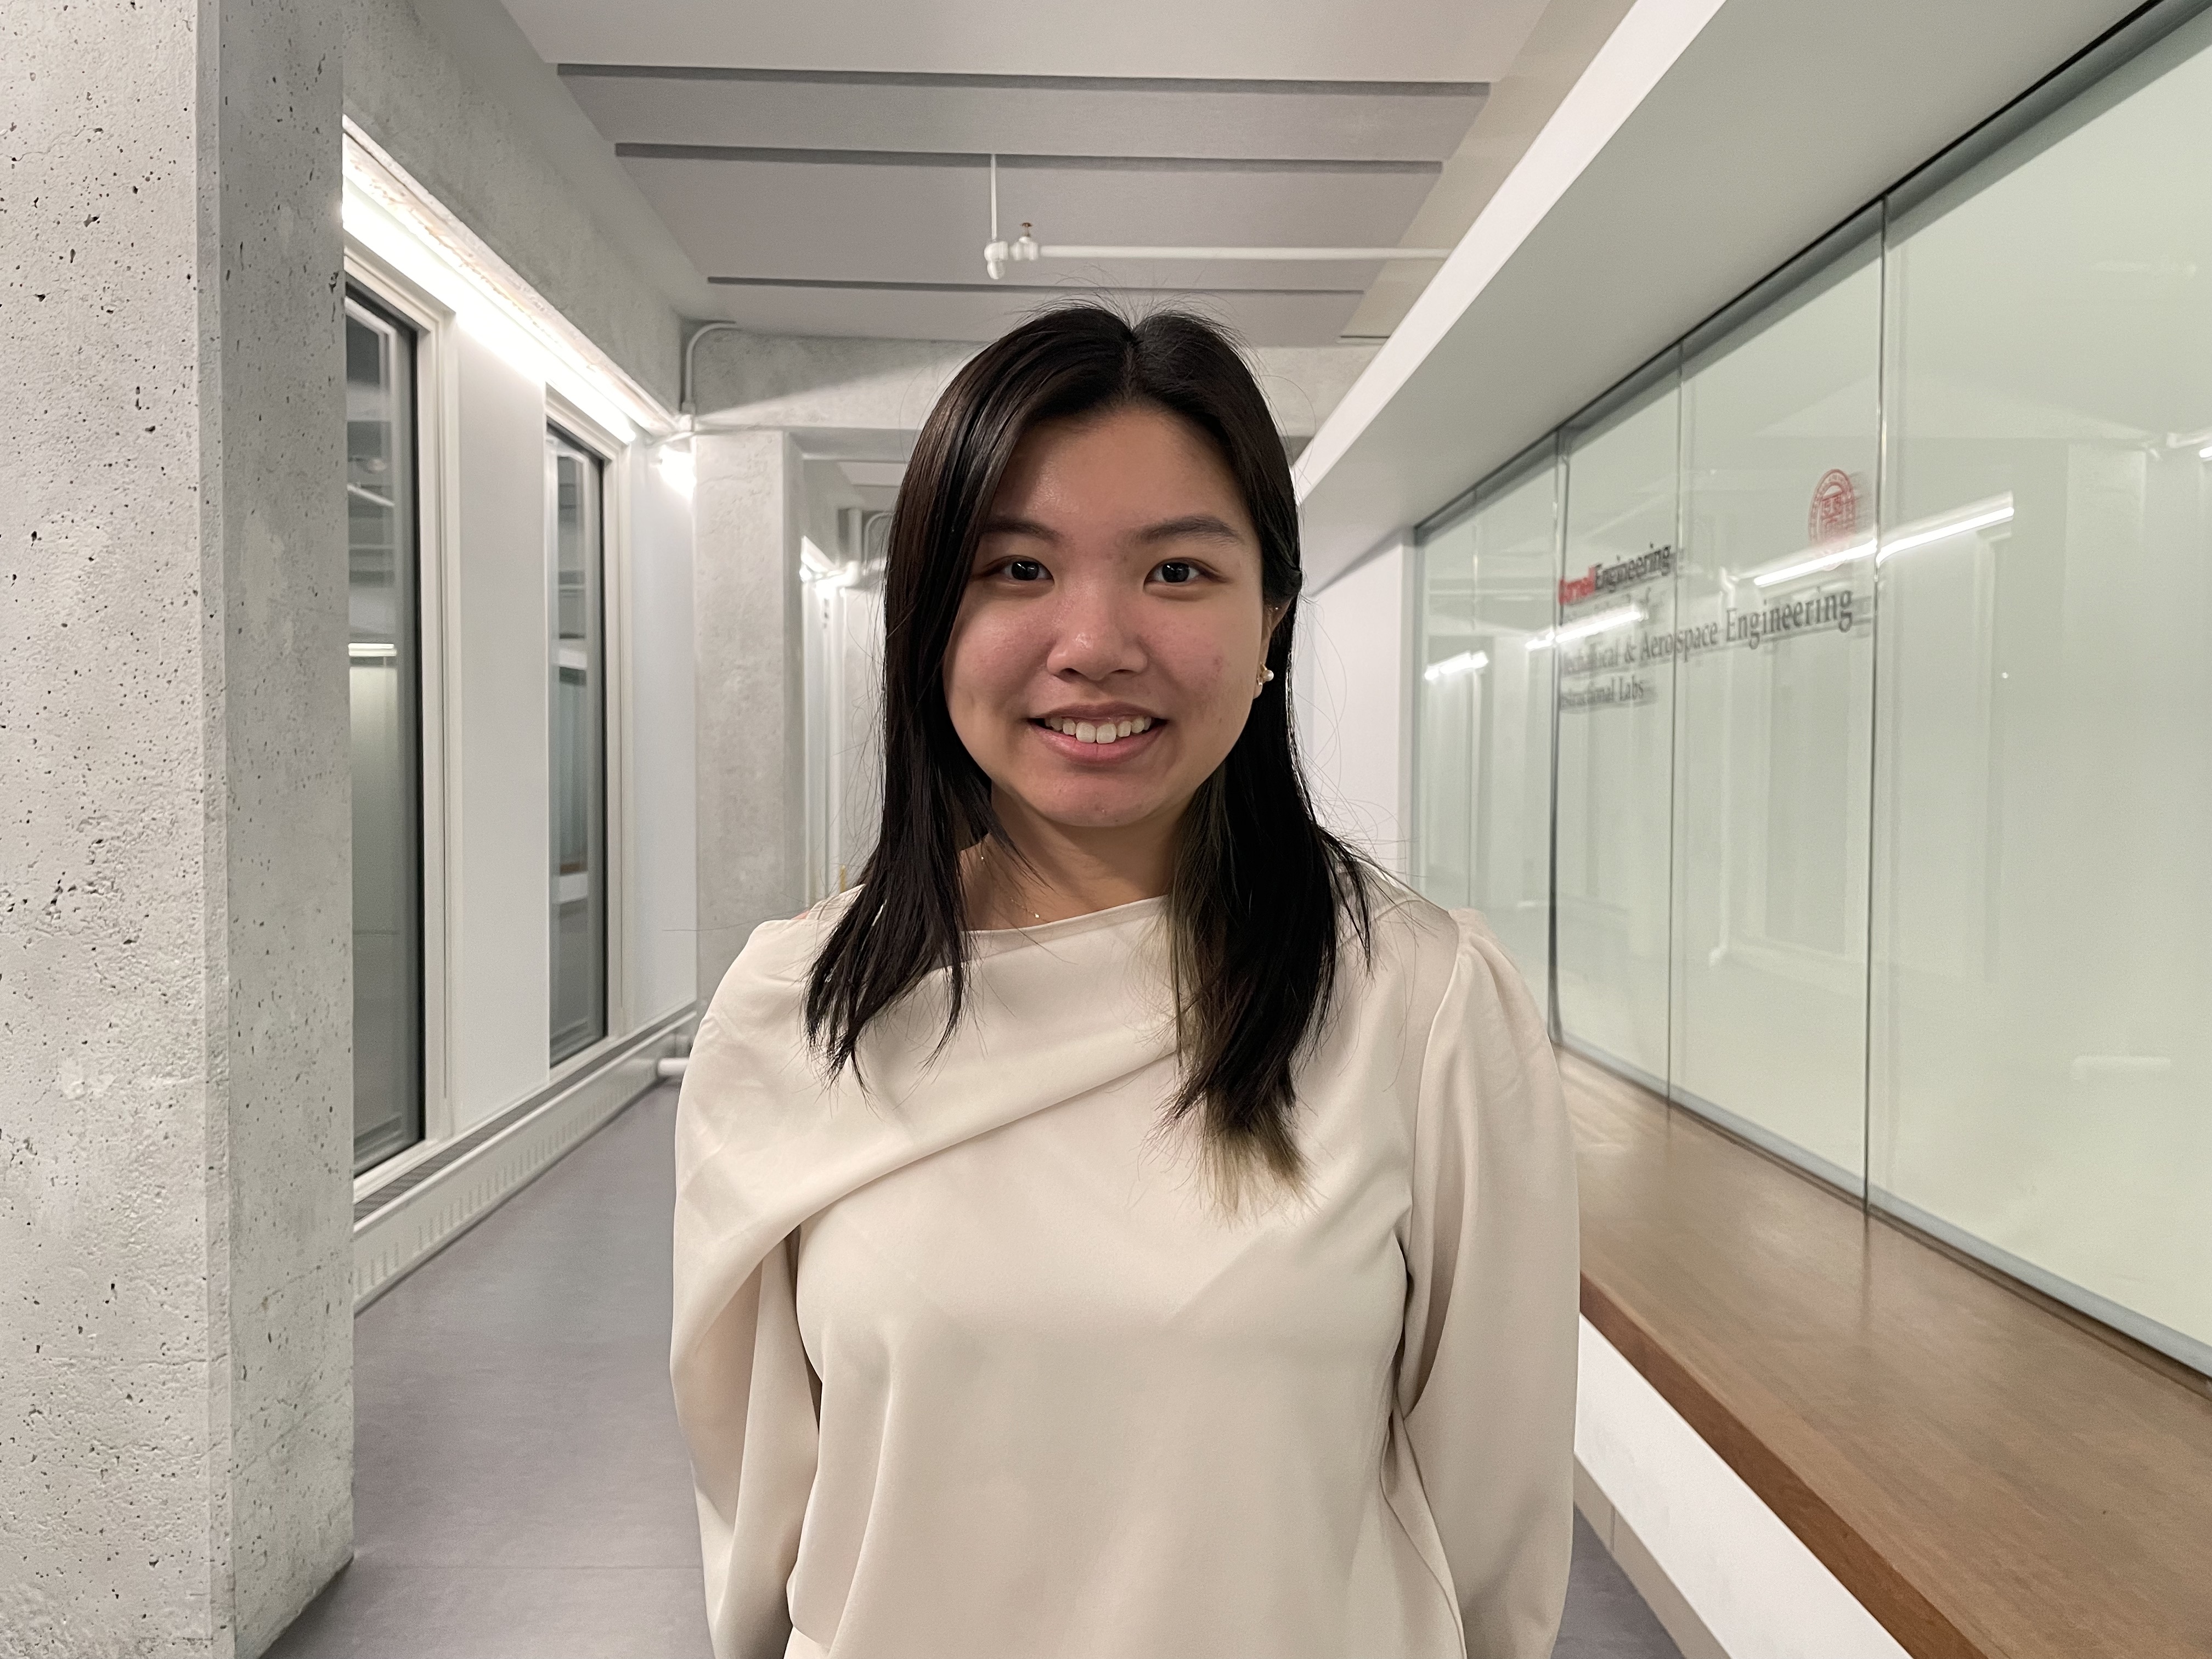 Meet May Li! <br><br>
              Meet Keri, a first year student and a member of the Business Subteam. She is an 
              avid foodie and loves to sleep. On her free time, Keri enjoys creating art and exploring 
              new places and activities. Her favorite season is winter, as she loves the snow.